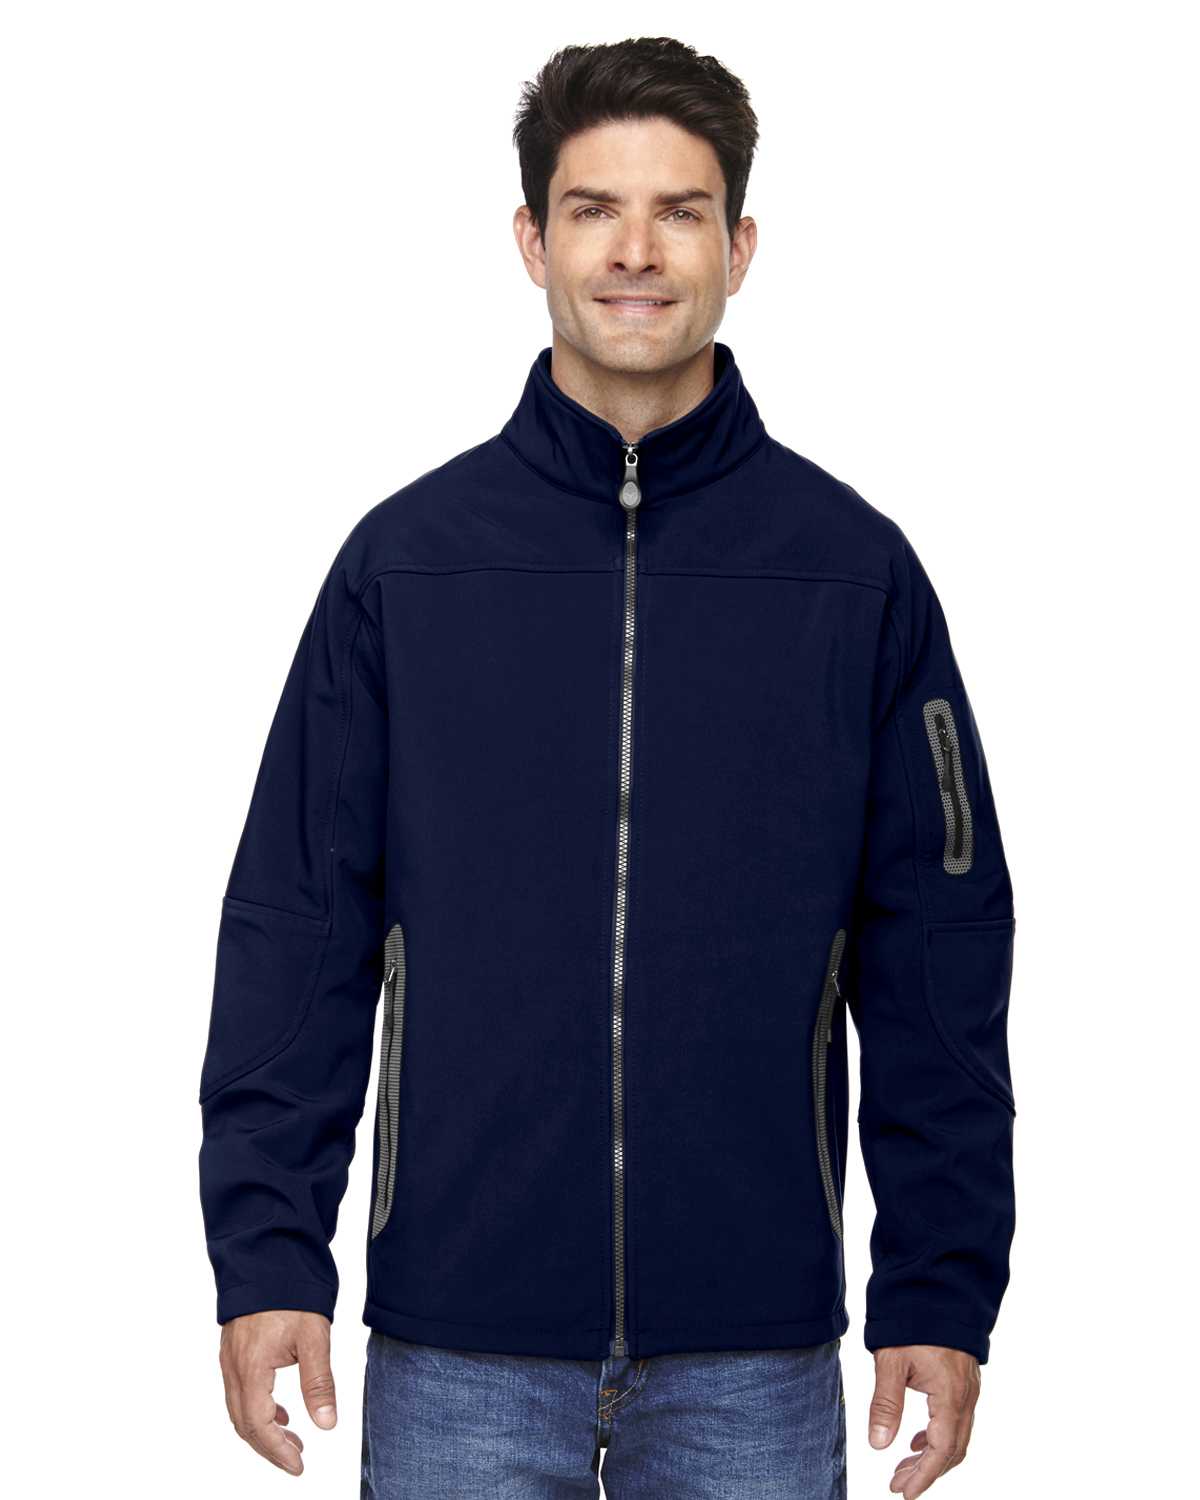 North End 88138 Men's Three-Layer Fleece Bonded Soft Shell Technical ...